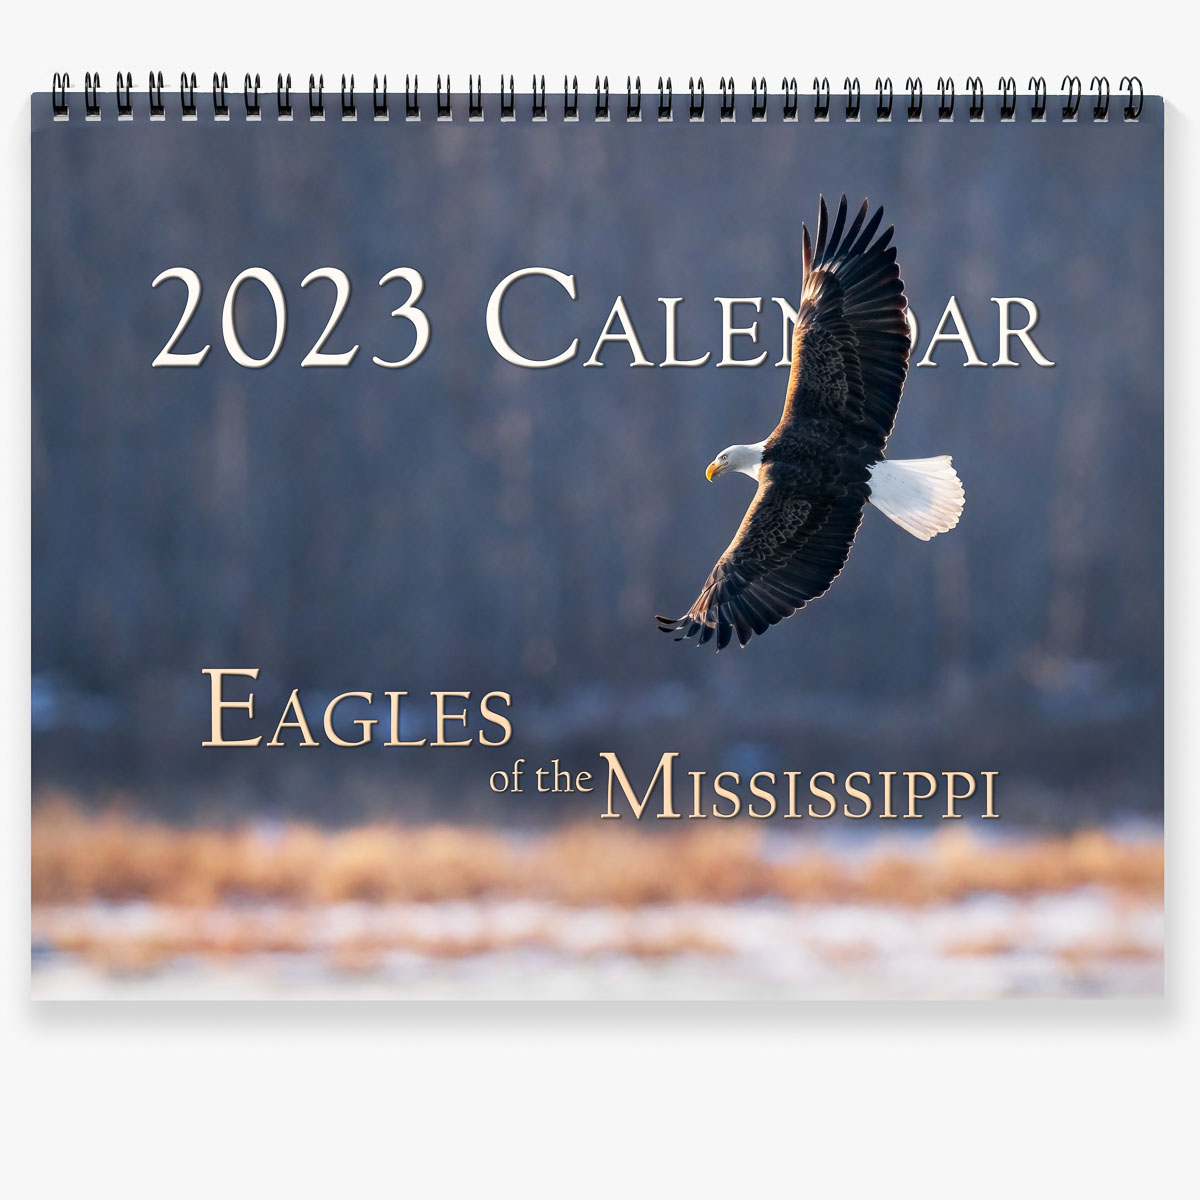 Trogography - Eagles of the Mississippi Calendar 2023